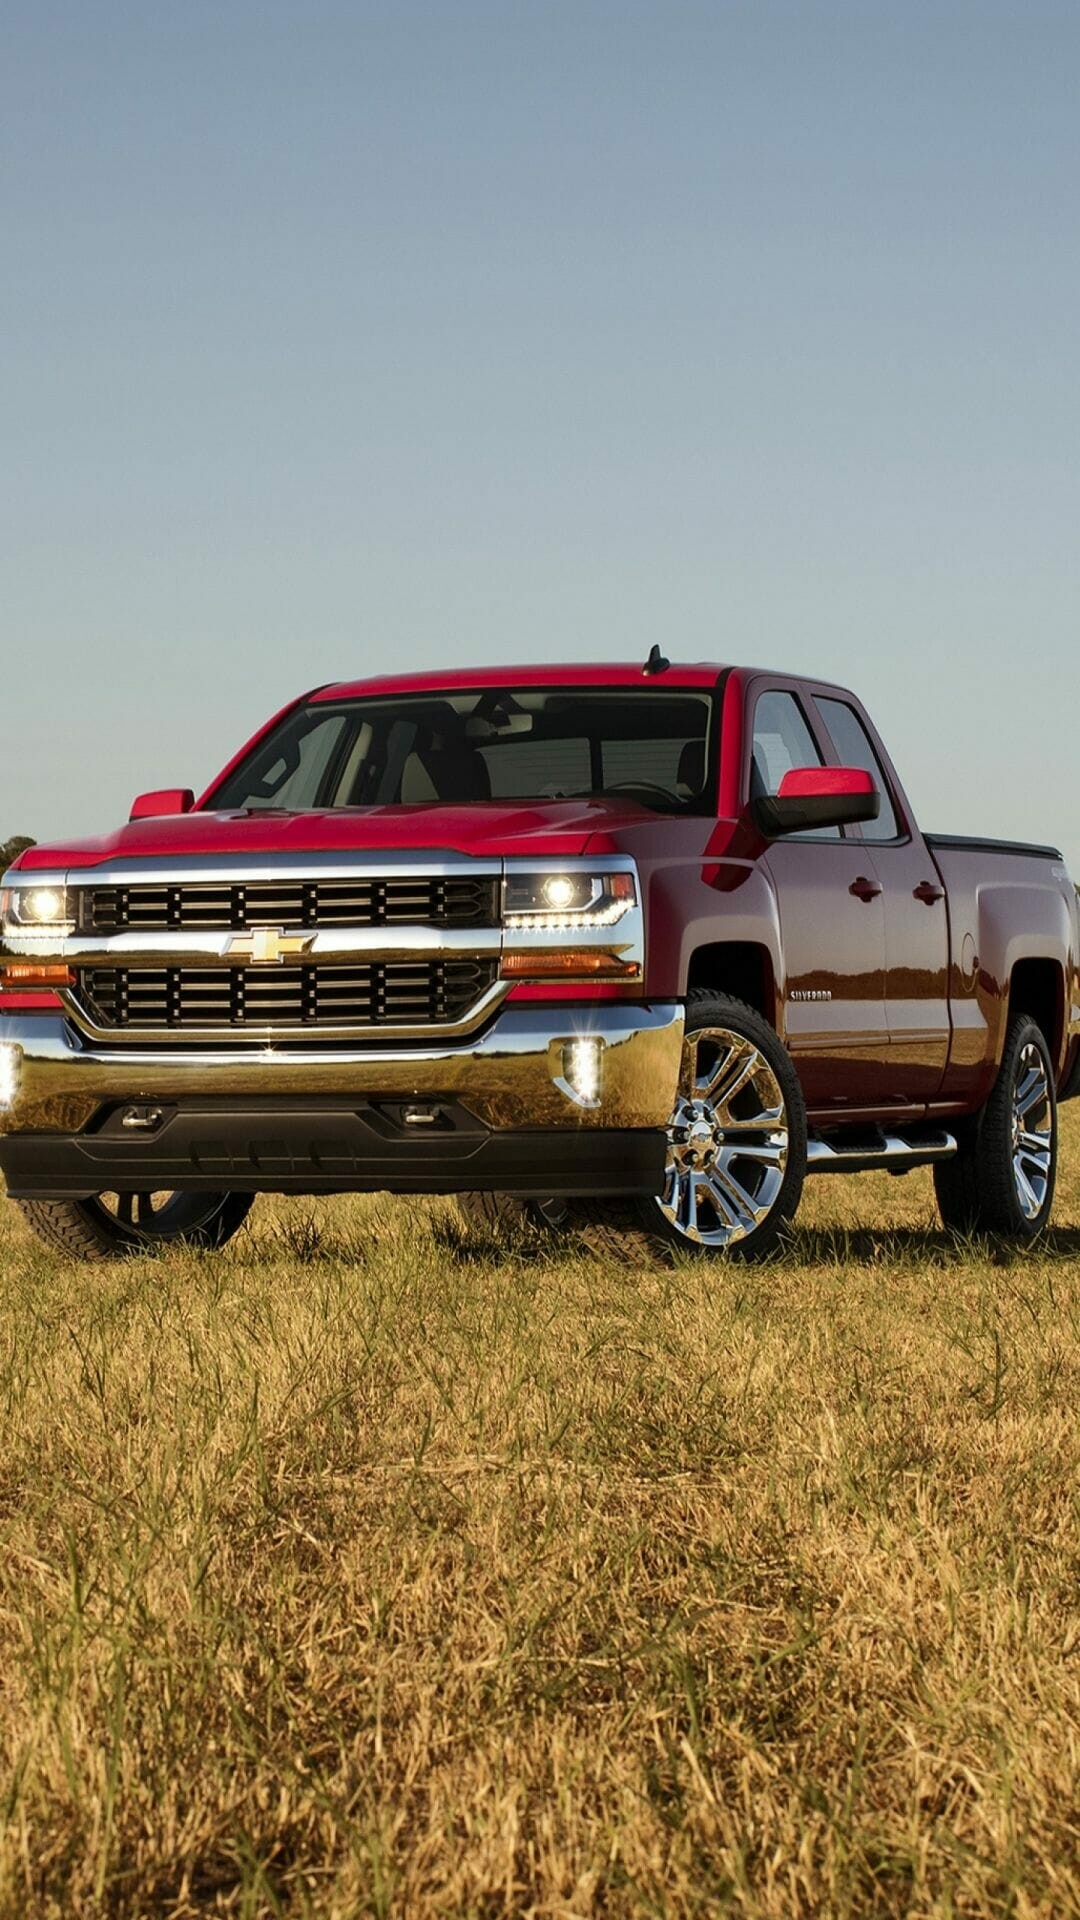 Chevrolet Silverado: Chevy, The truck ready for any adventure, Off-road capability. 1080x1920 Full HD Wallpaper.